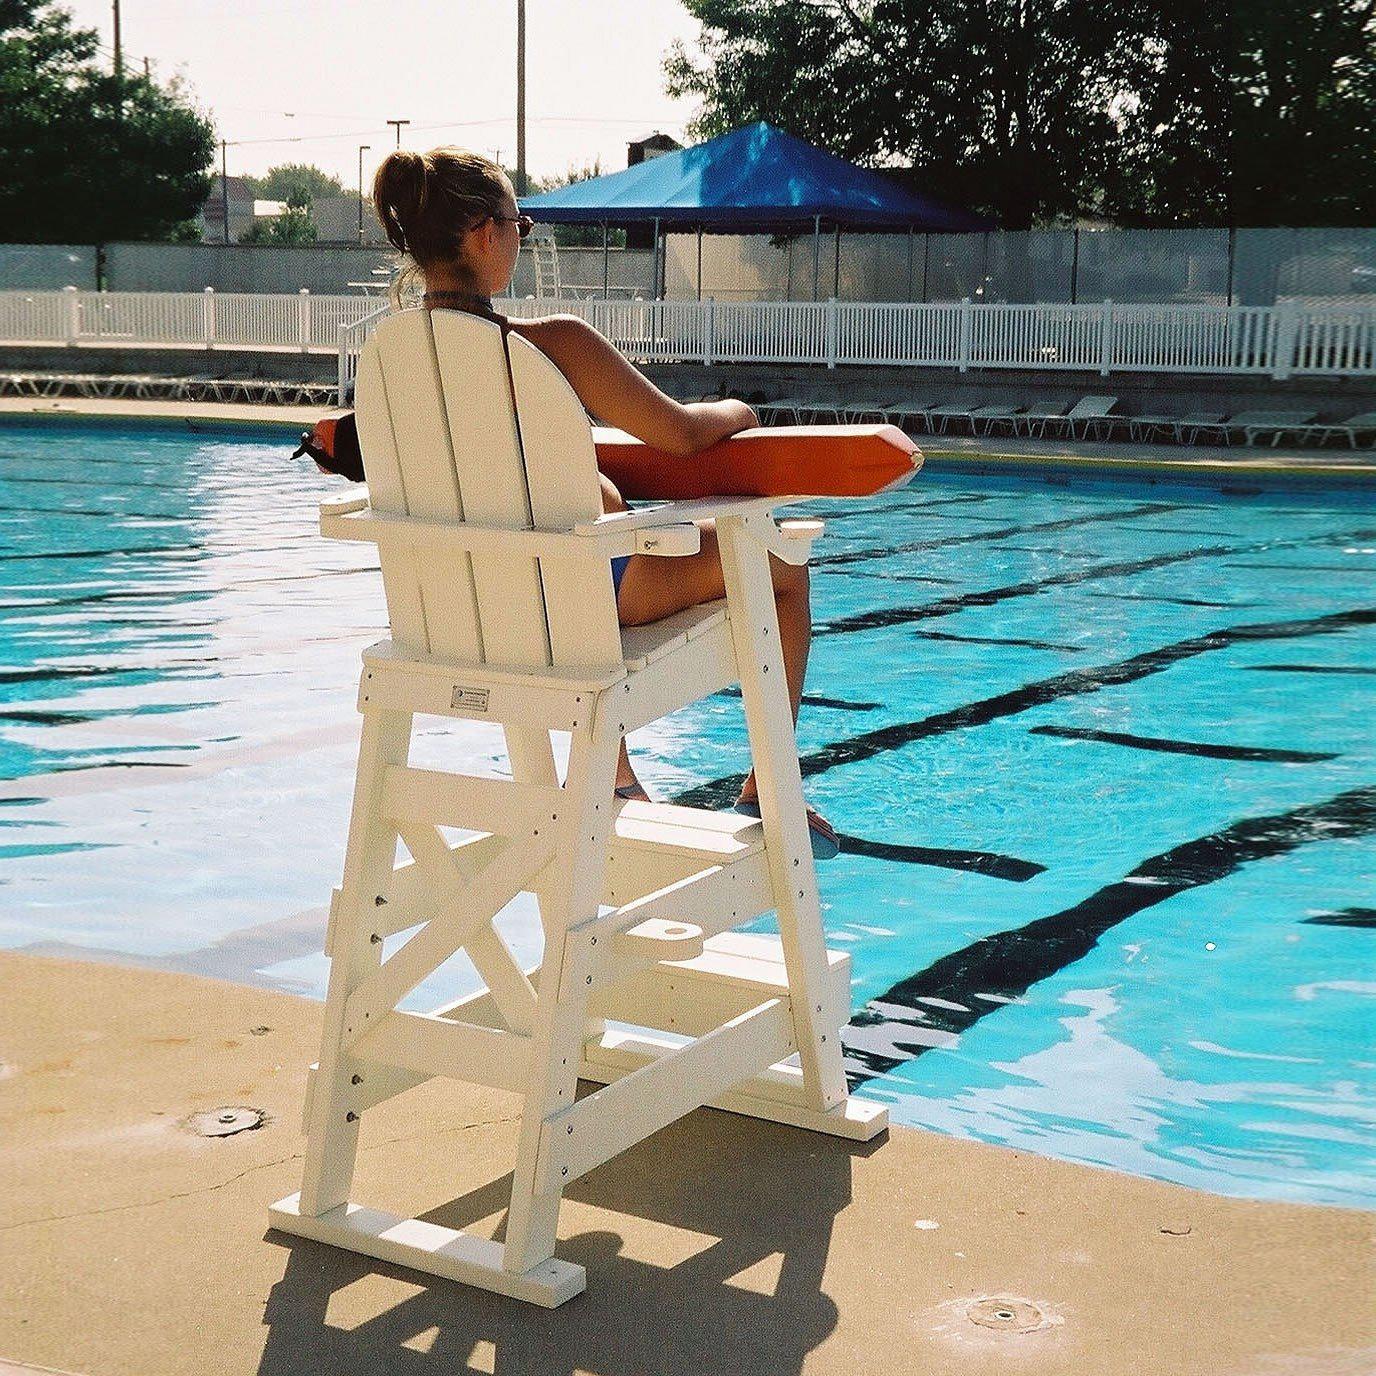 Tailwind Recycled Plastic Lifeguard Chairs and Patio Furniture